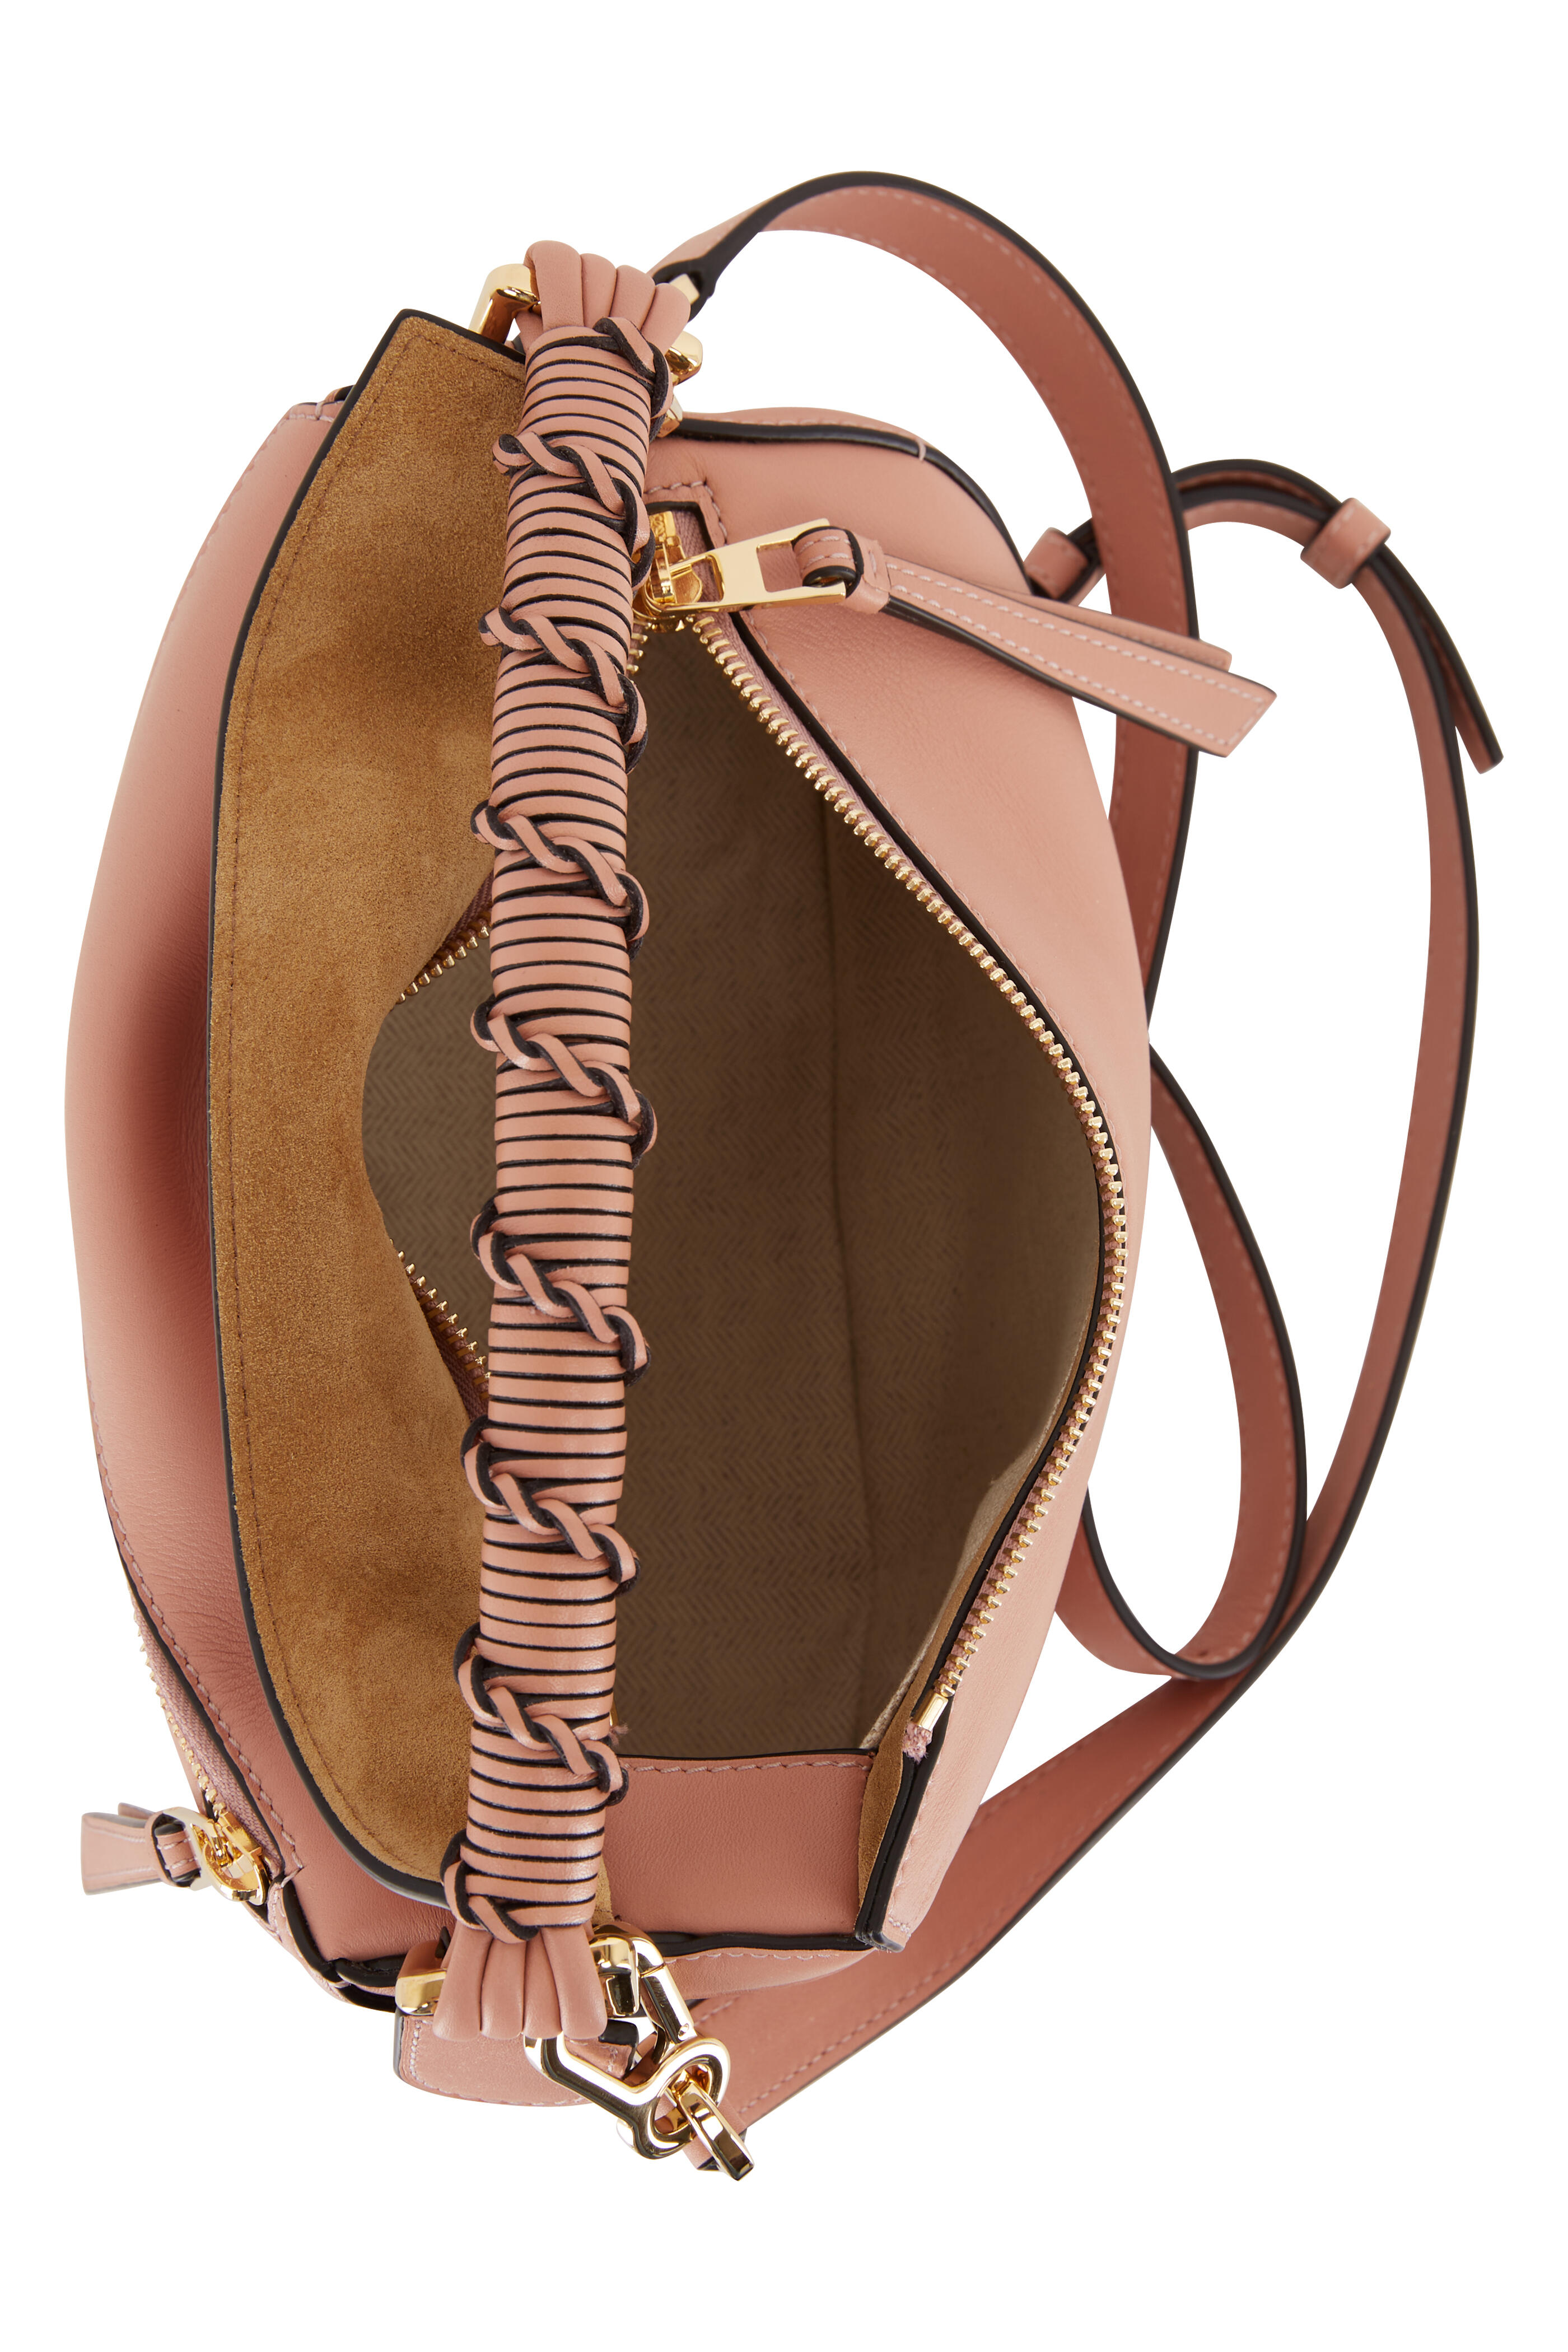 Loewe Puzzle Edge Small Bag in Dusty Pink